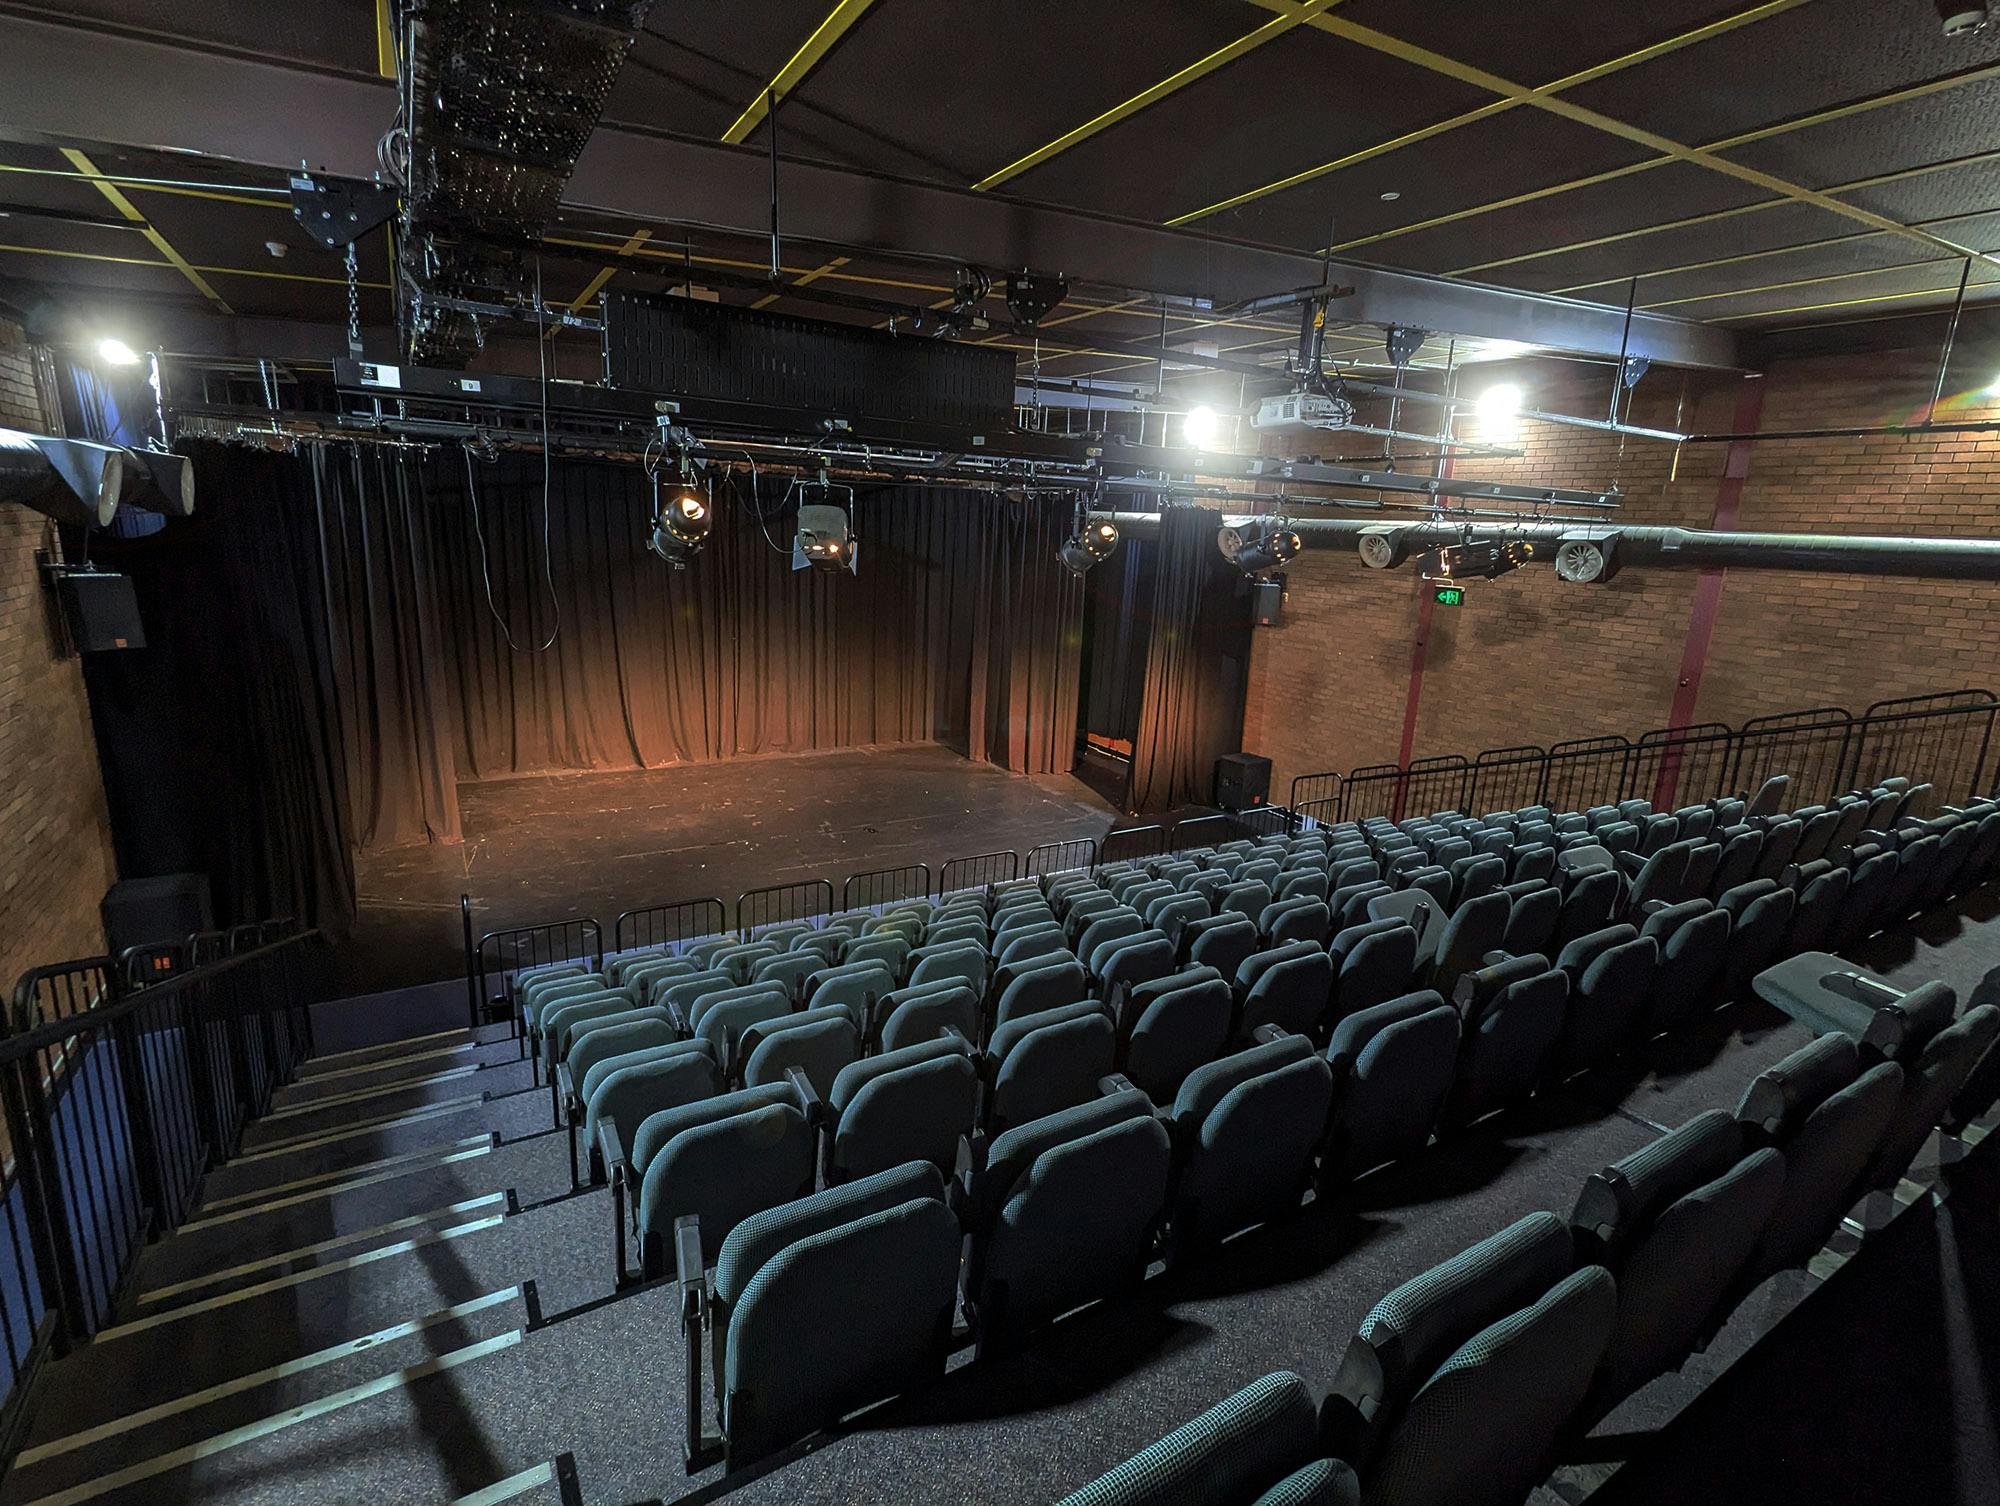 The stage and seating at the Belconnen Community Theatre